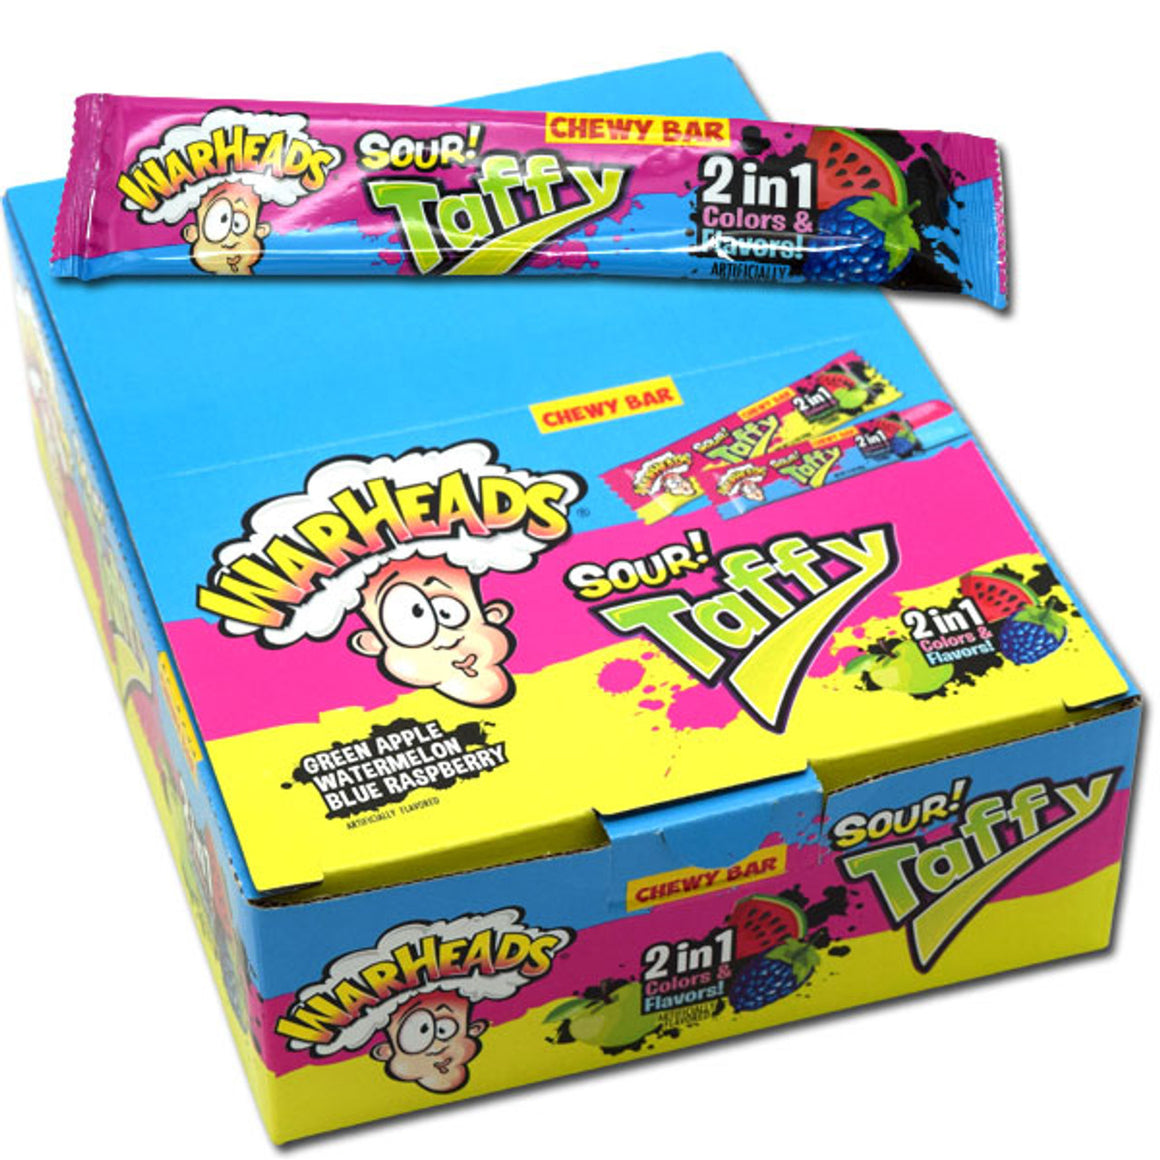 All City Candy Warheads Sour Taffy 2 in 1 Chewy Bar 1.5 oz. Case of 24 Sour Flix Candy For fresh candy and great service, visit www.allcitycandy.com